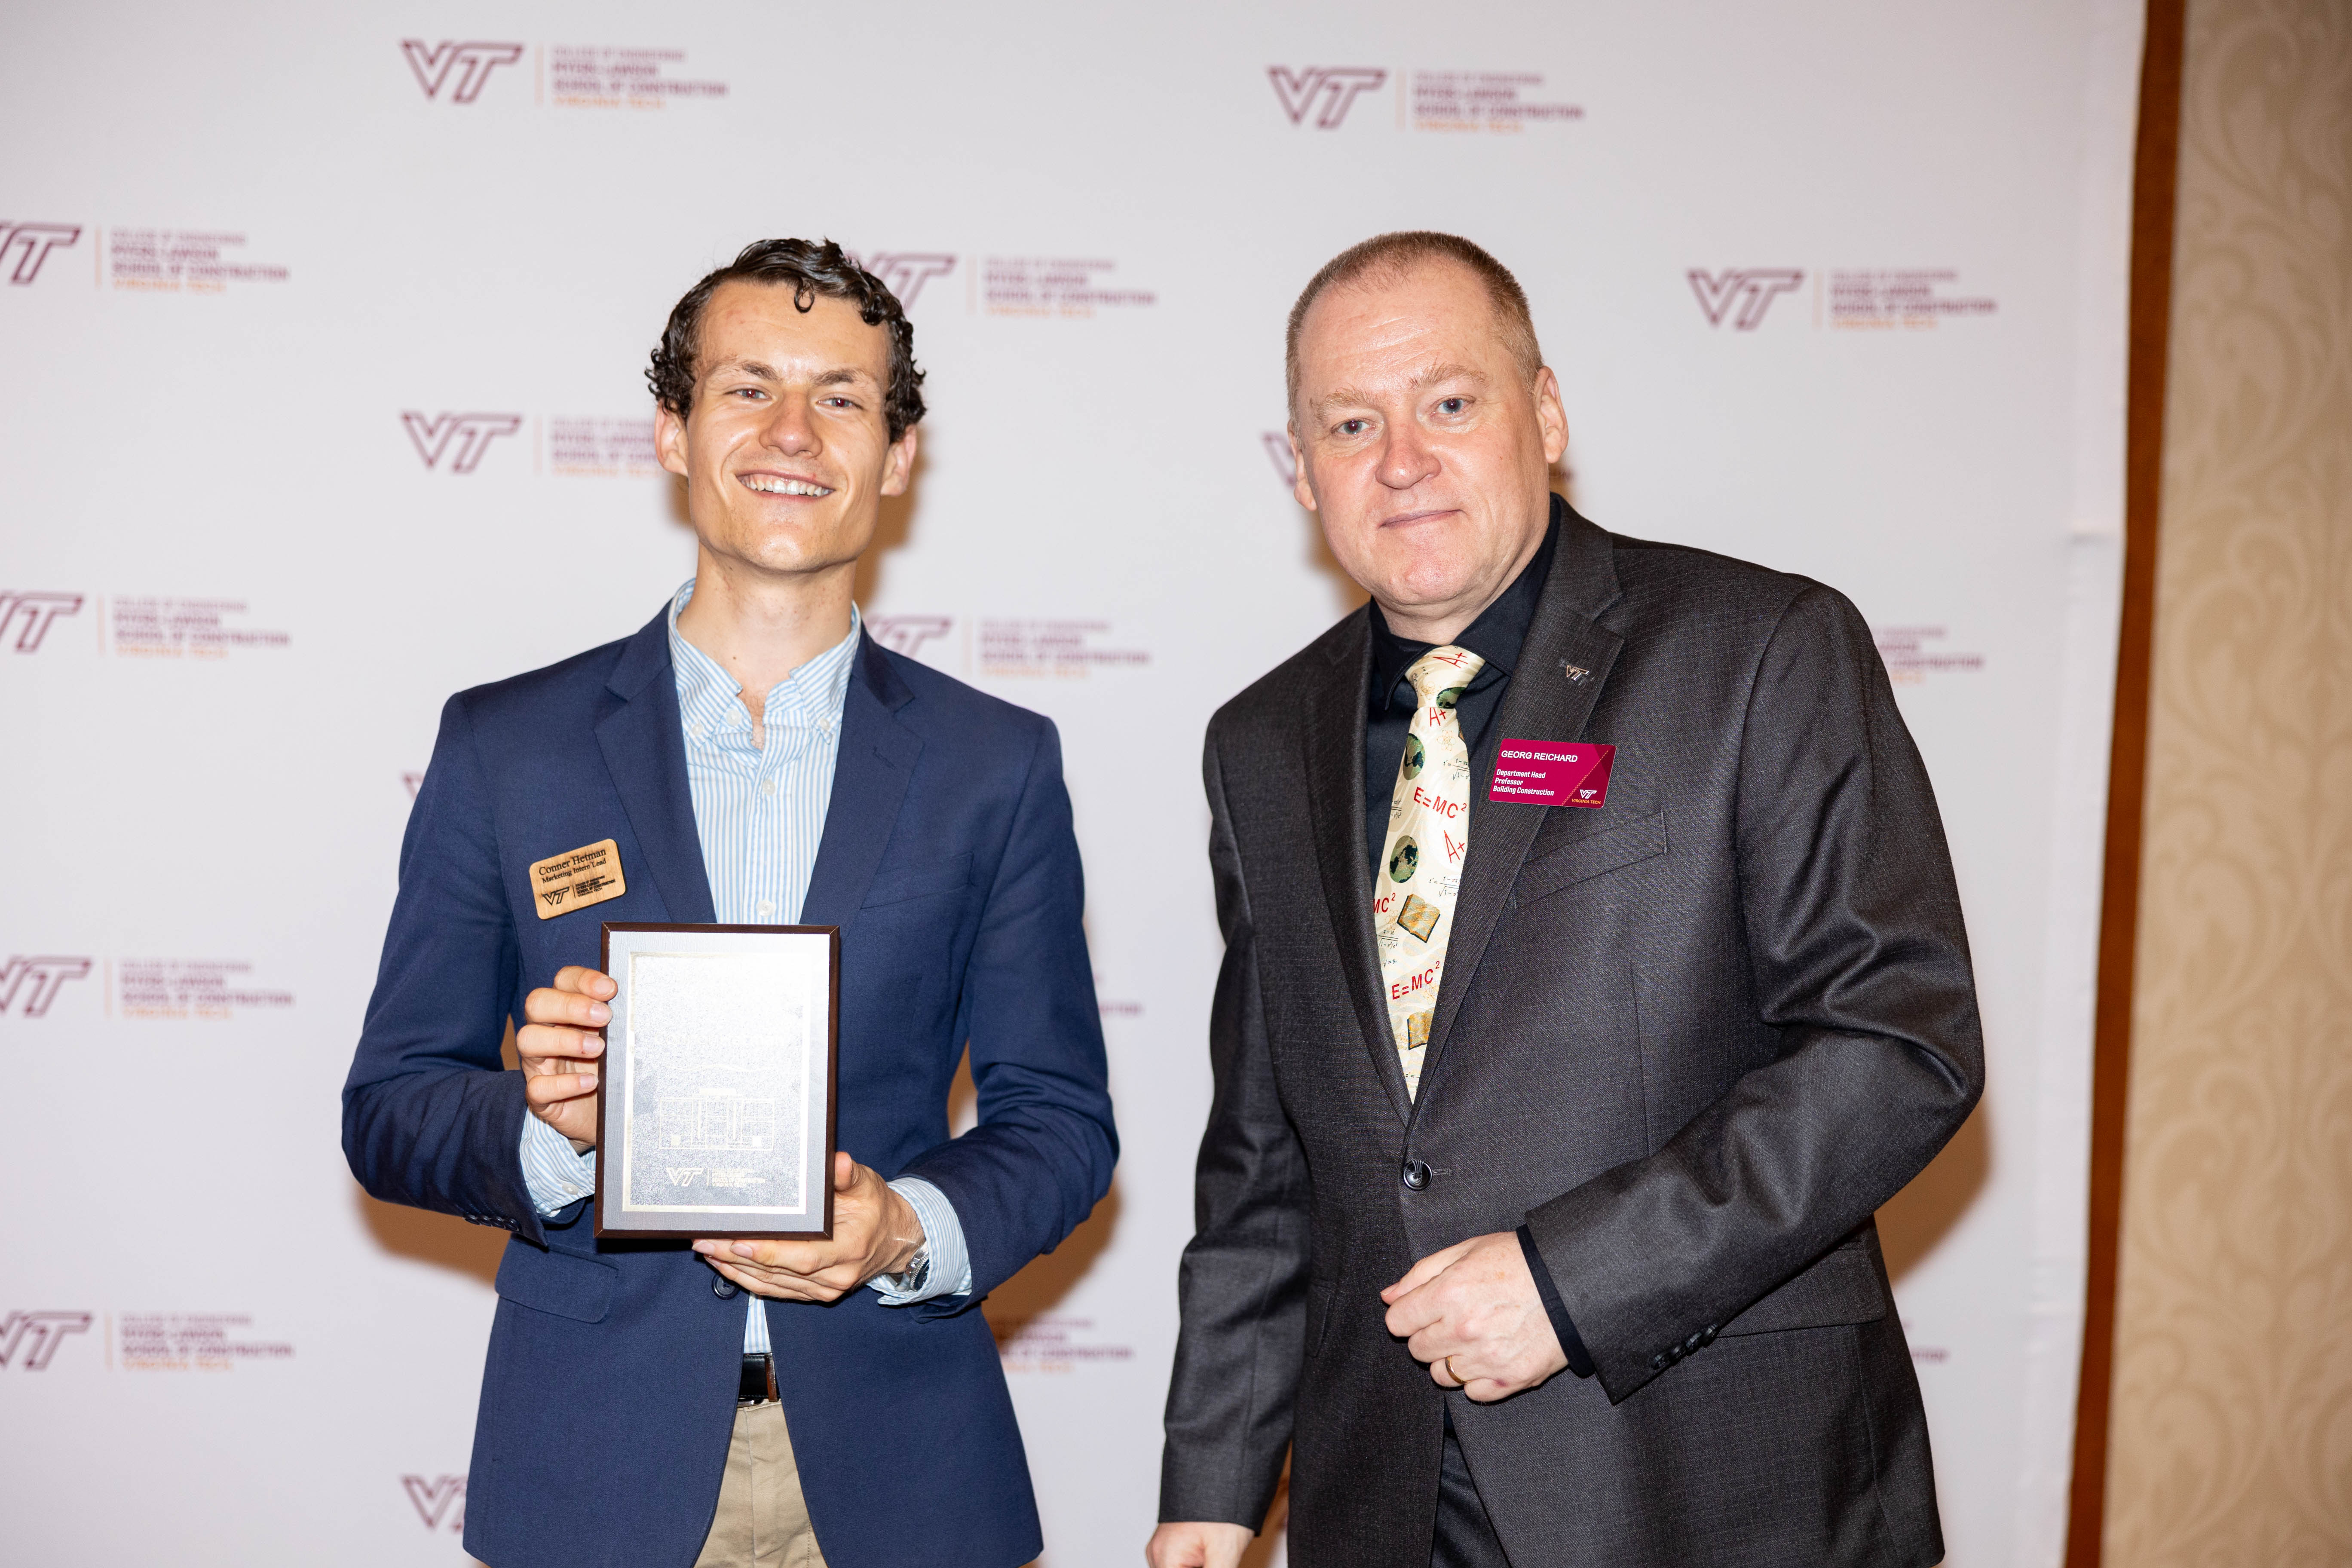 Connor Hetman (at left) and Georg Reichard. Photo by Will Drew for Virginia Tech.